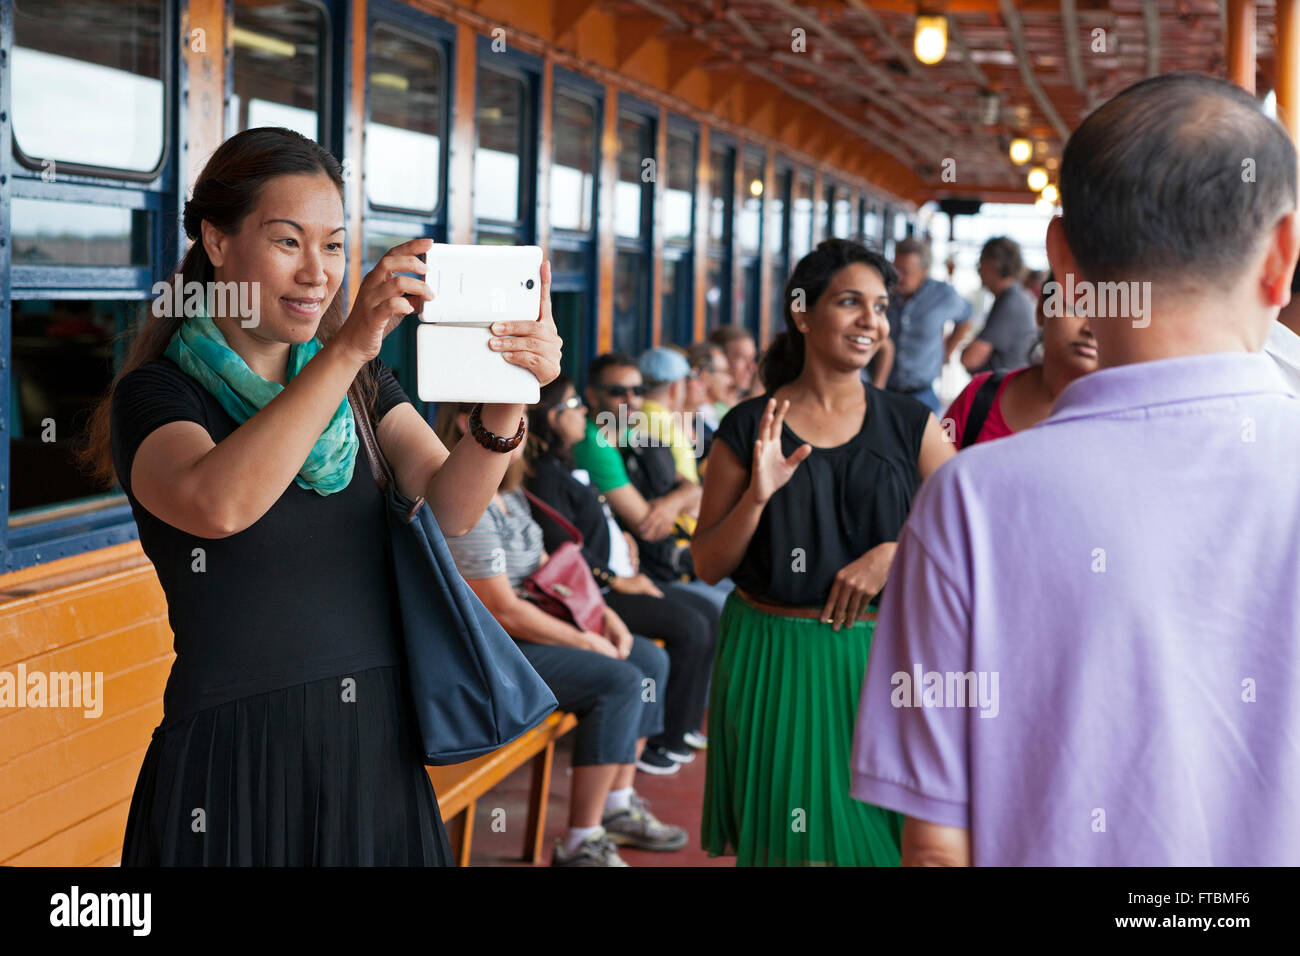 People from all over the world take pictures of each other on the Staten Island Ferry in New York City. Stock Photo